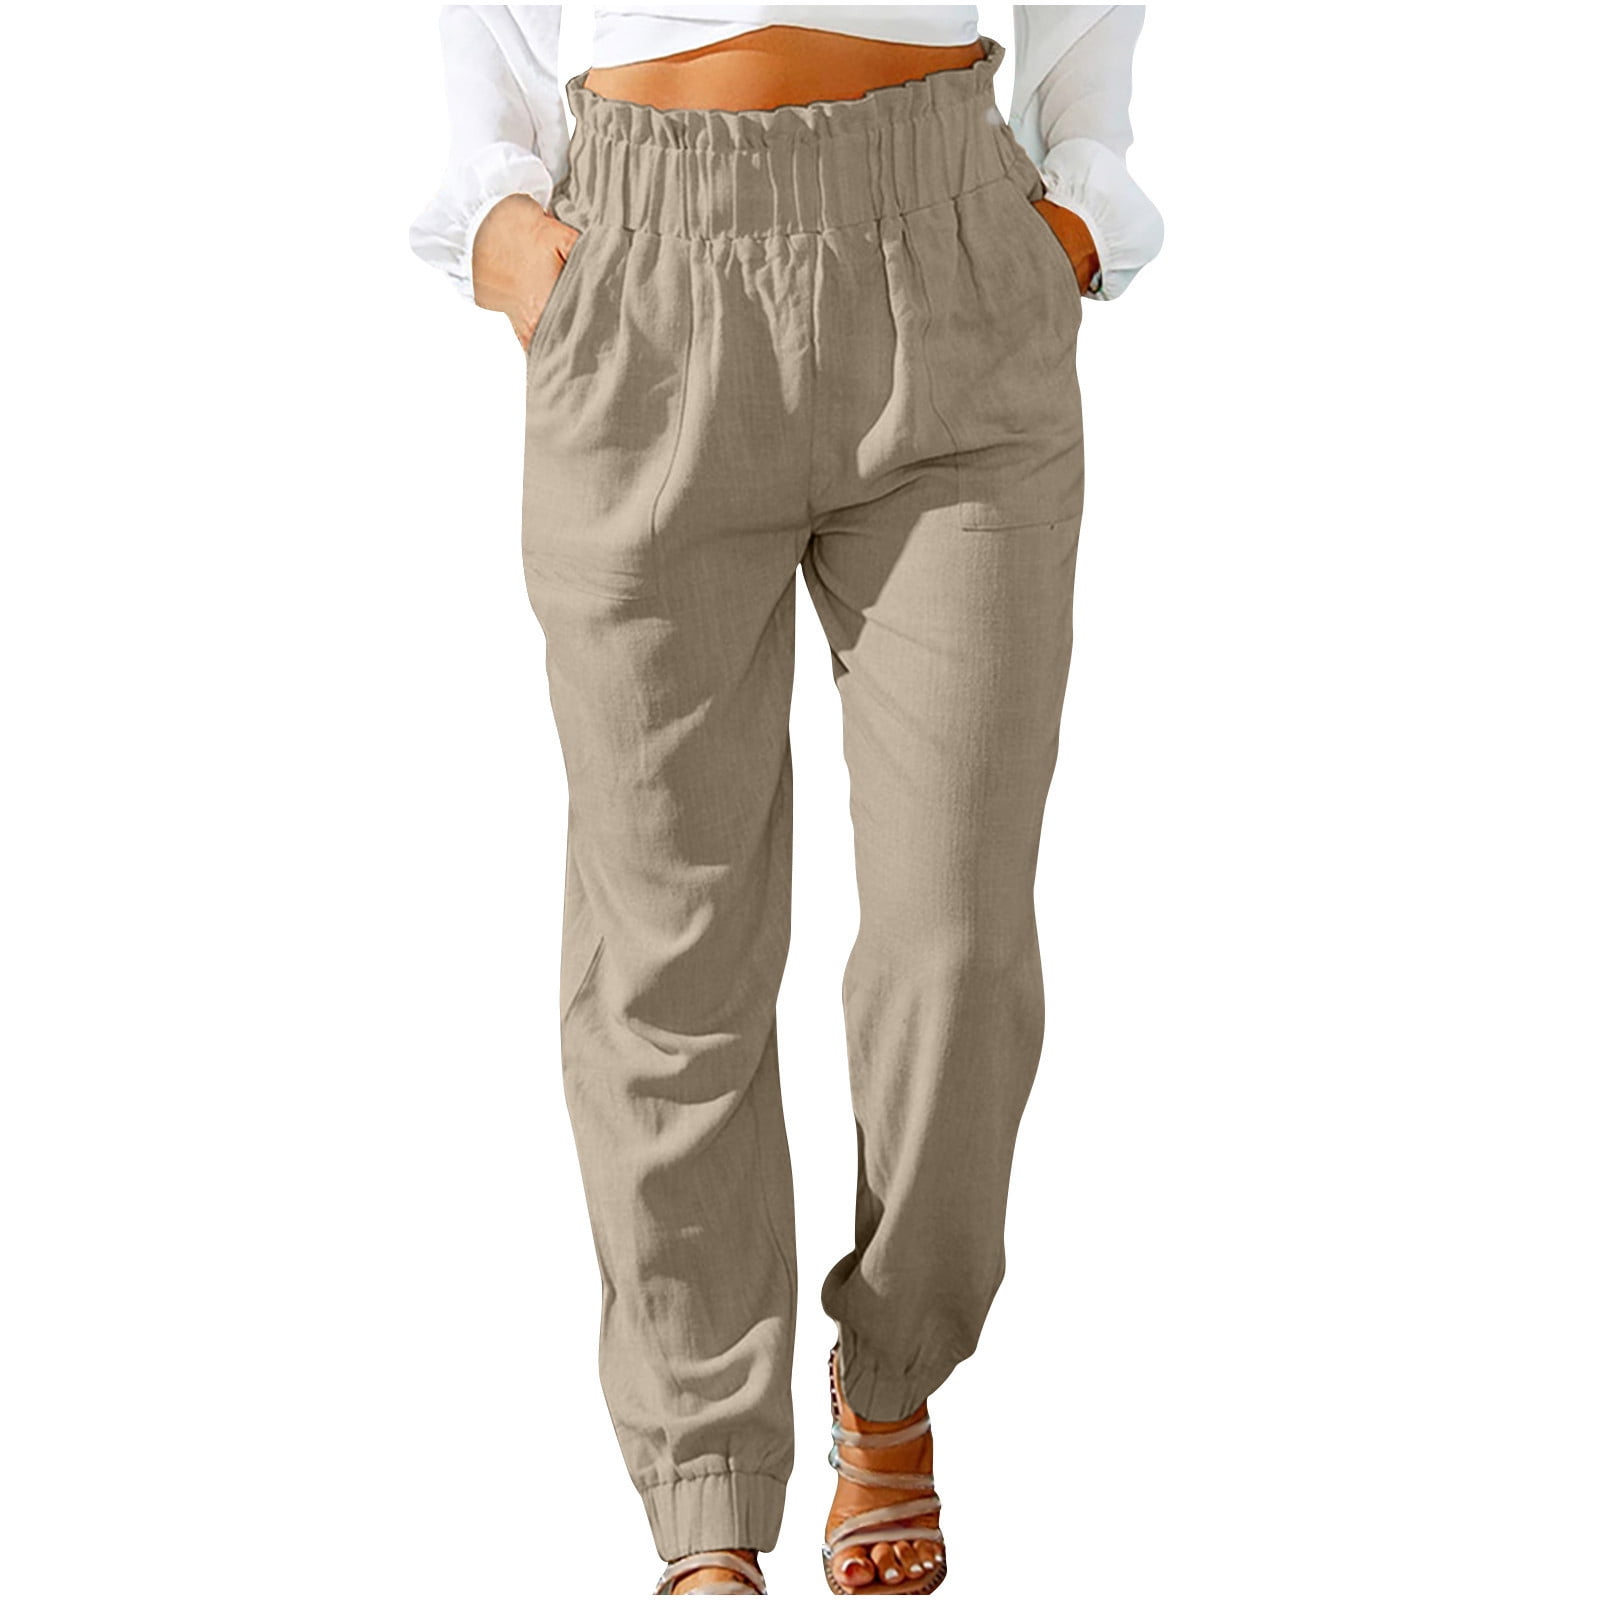 ylioge Womens Tapered High Waist Capris Solid Color Relaxed Fit